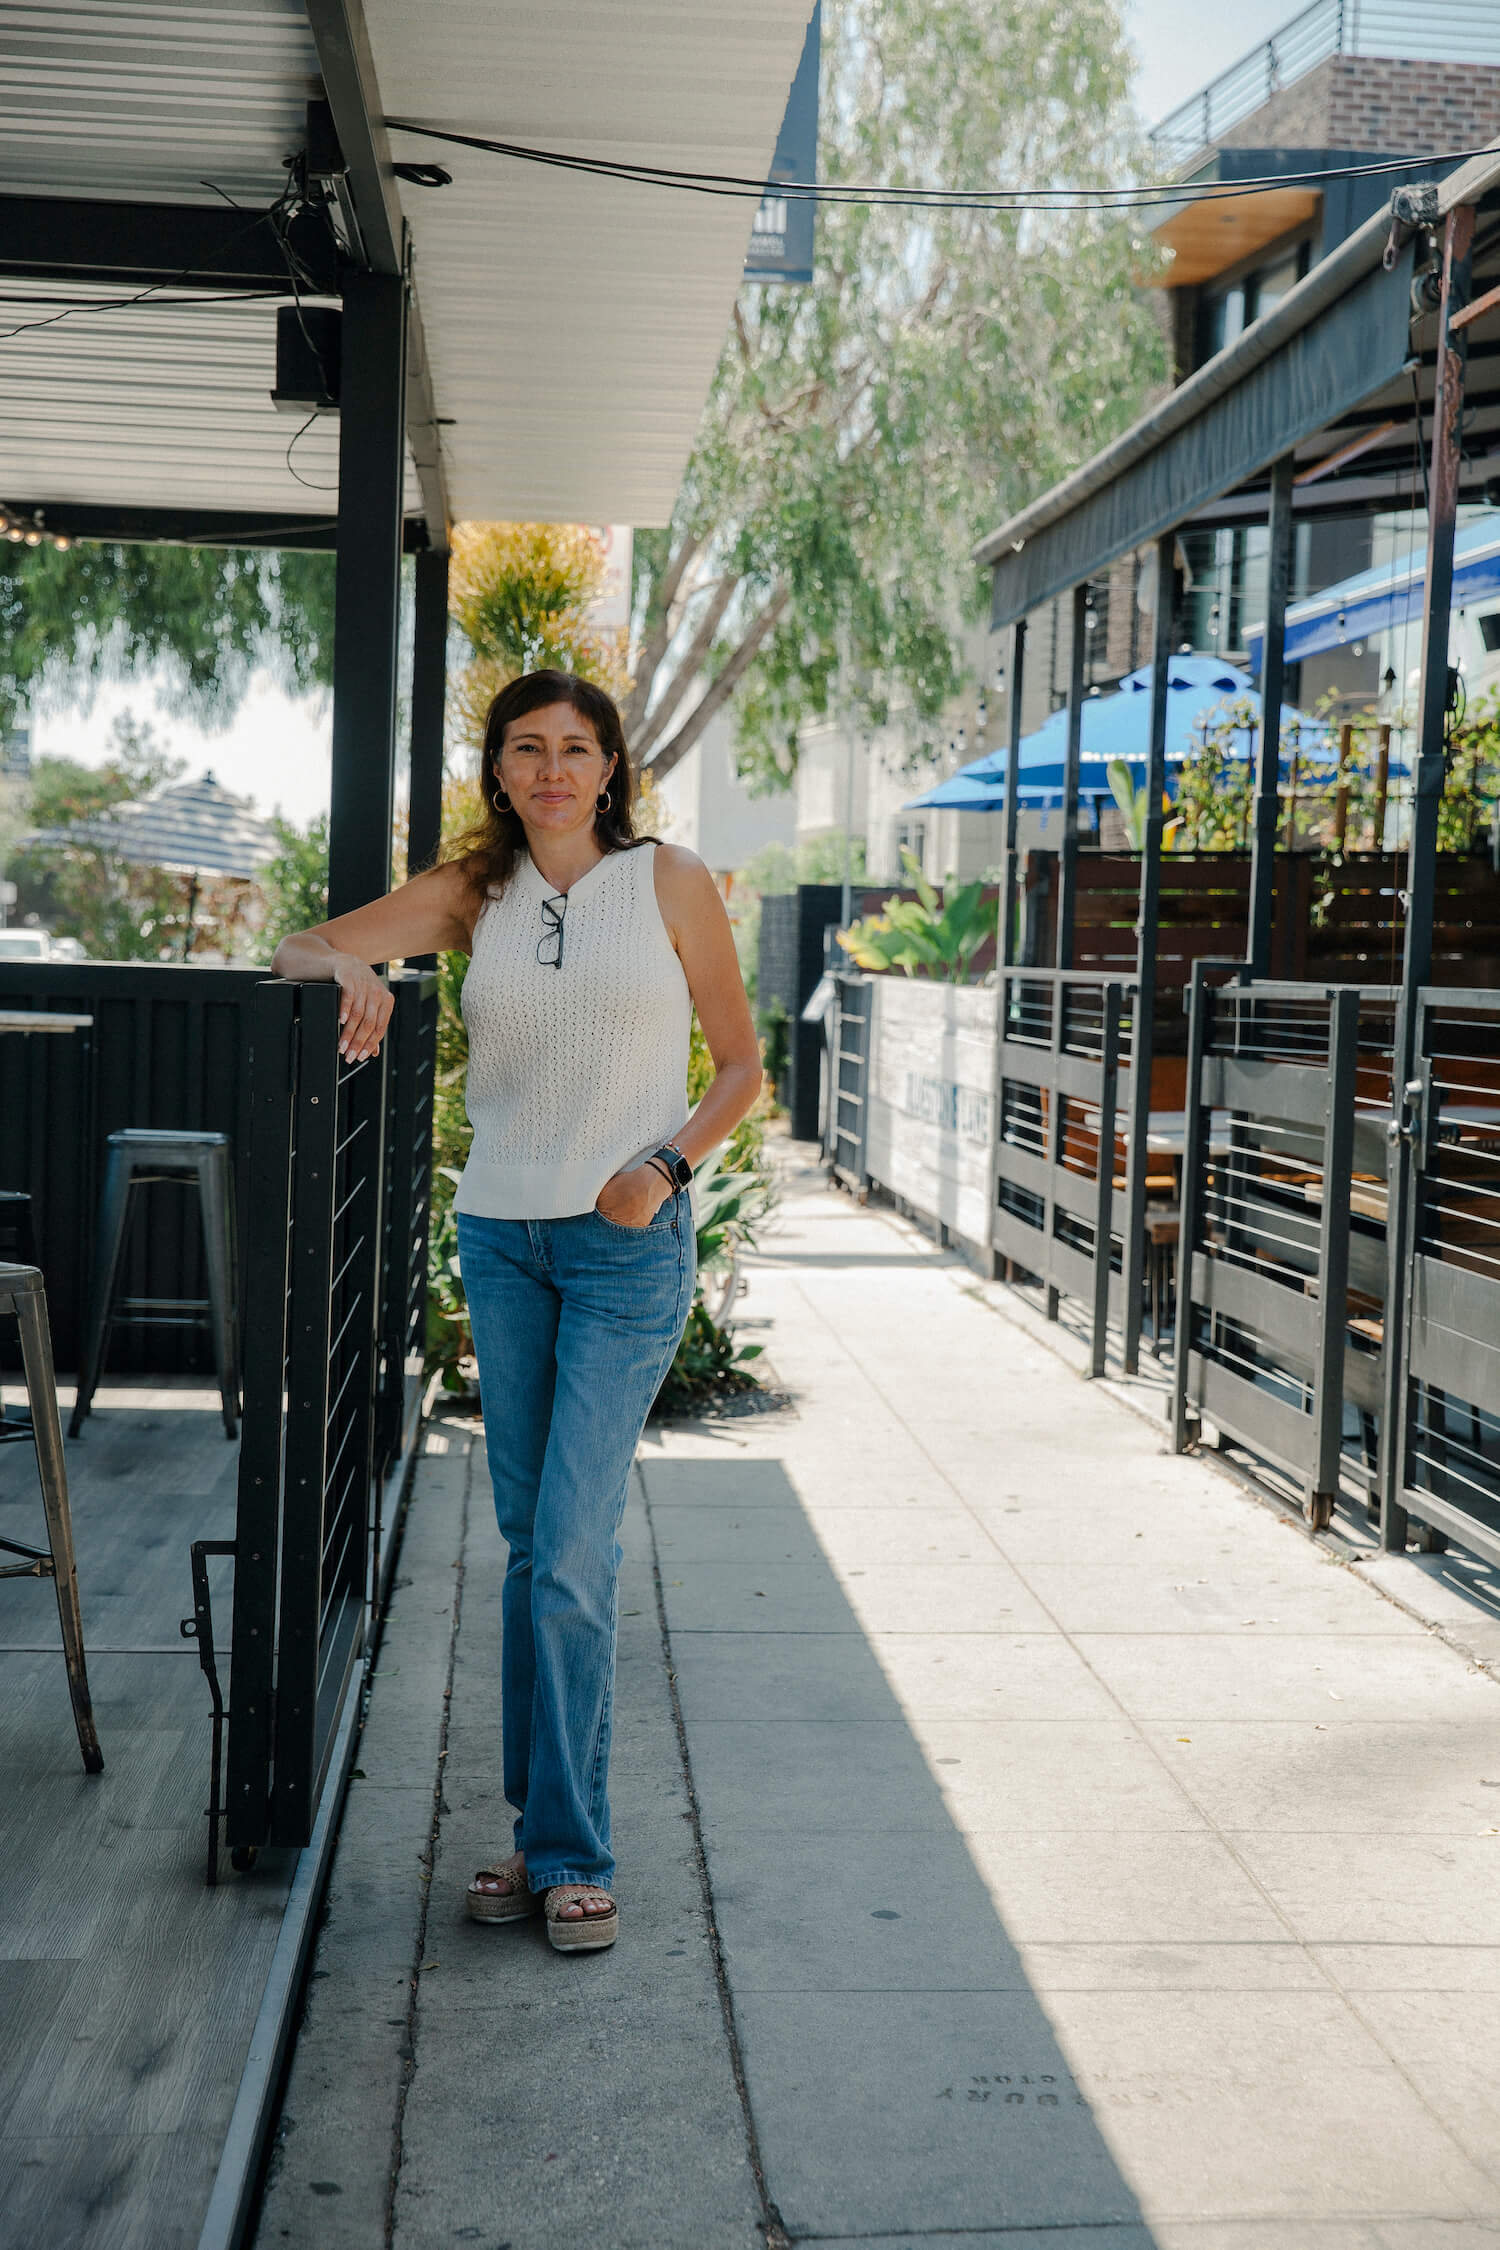 Norma Alvarado, co-owner of Venice Beach Wines, is proud that the street's kept big franchises out and avoided becoming the next trendy Abbott Kinney Boulevard, at least so far. December 2021